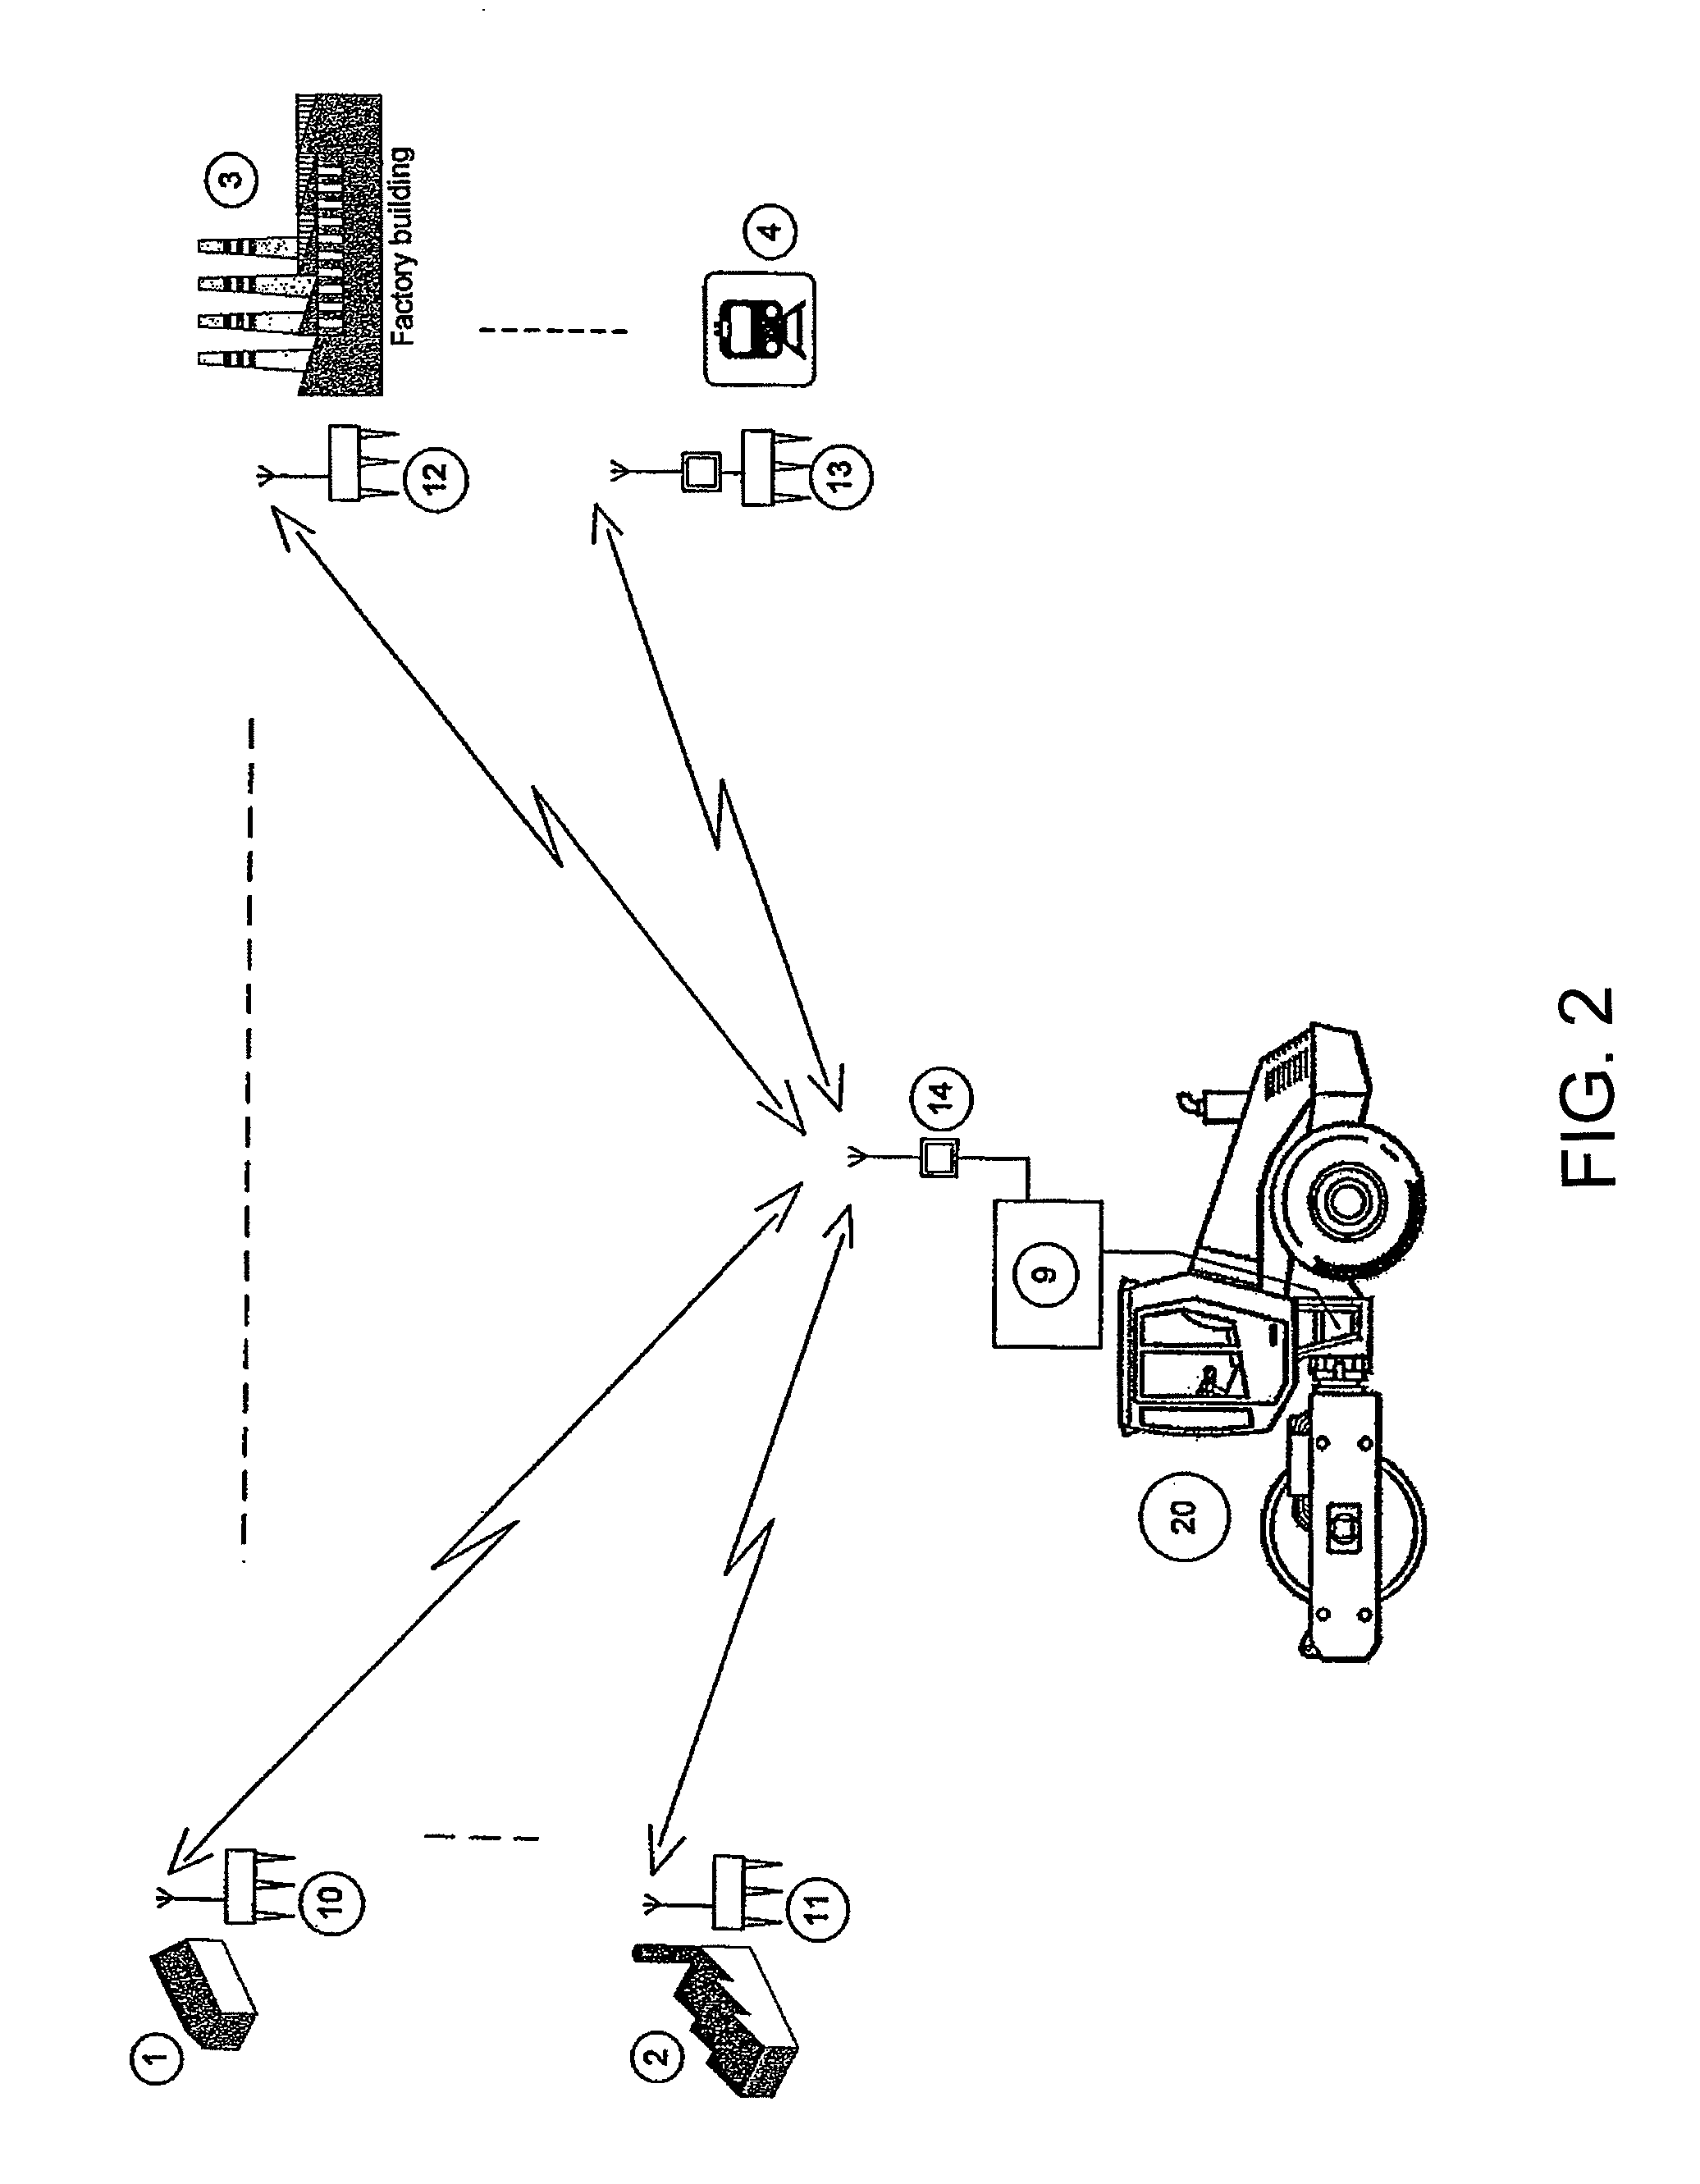 Method and system for controlling compaction machines